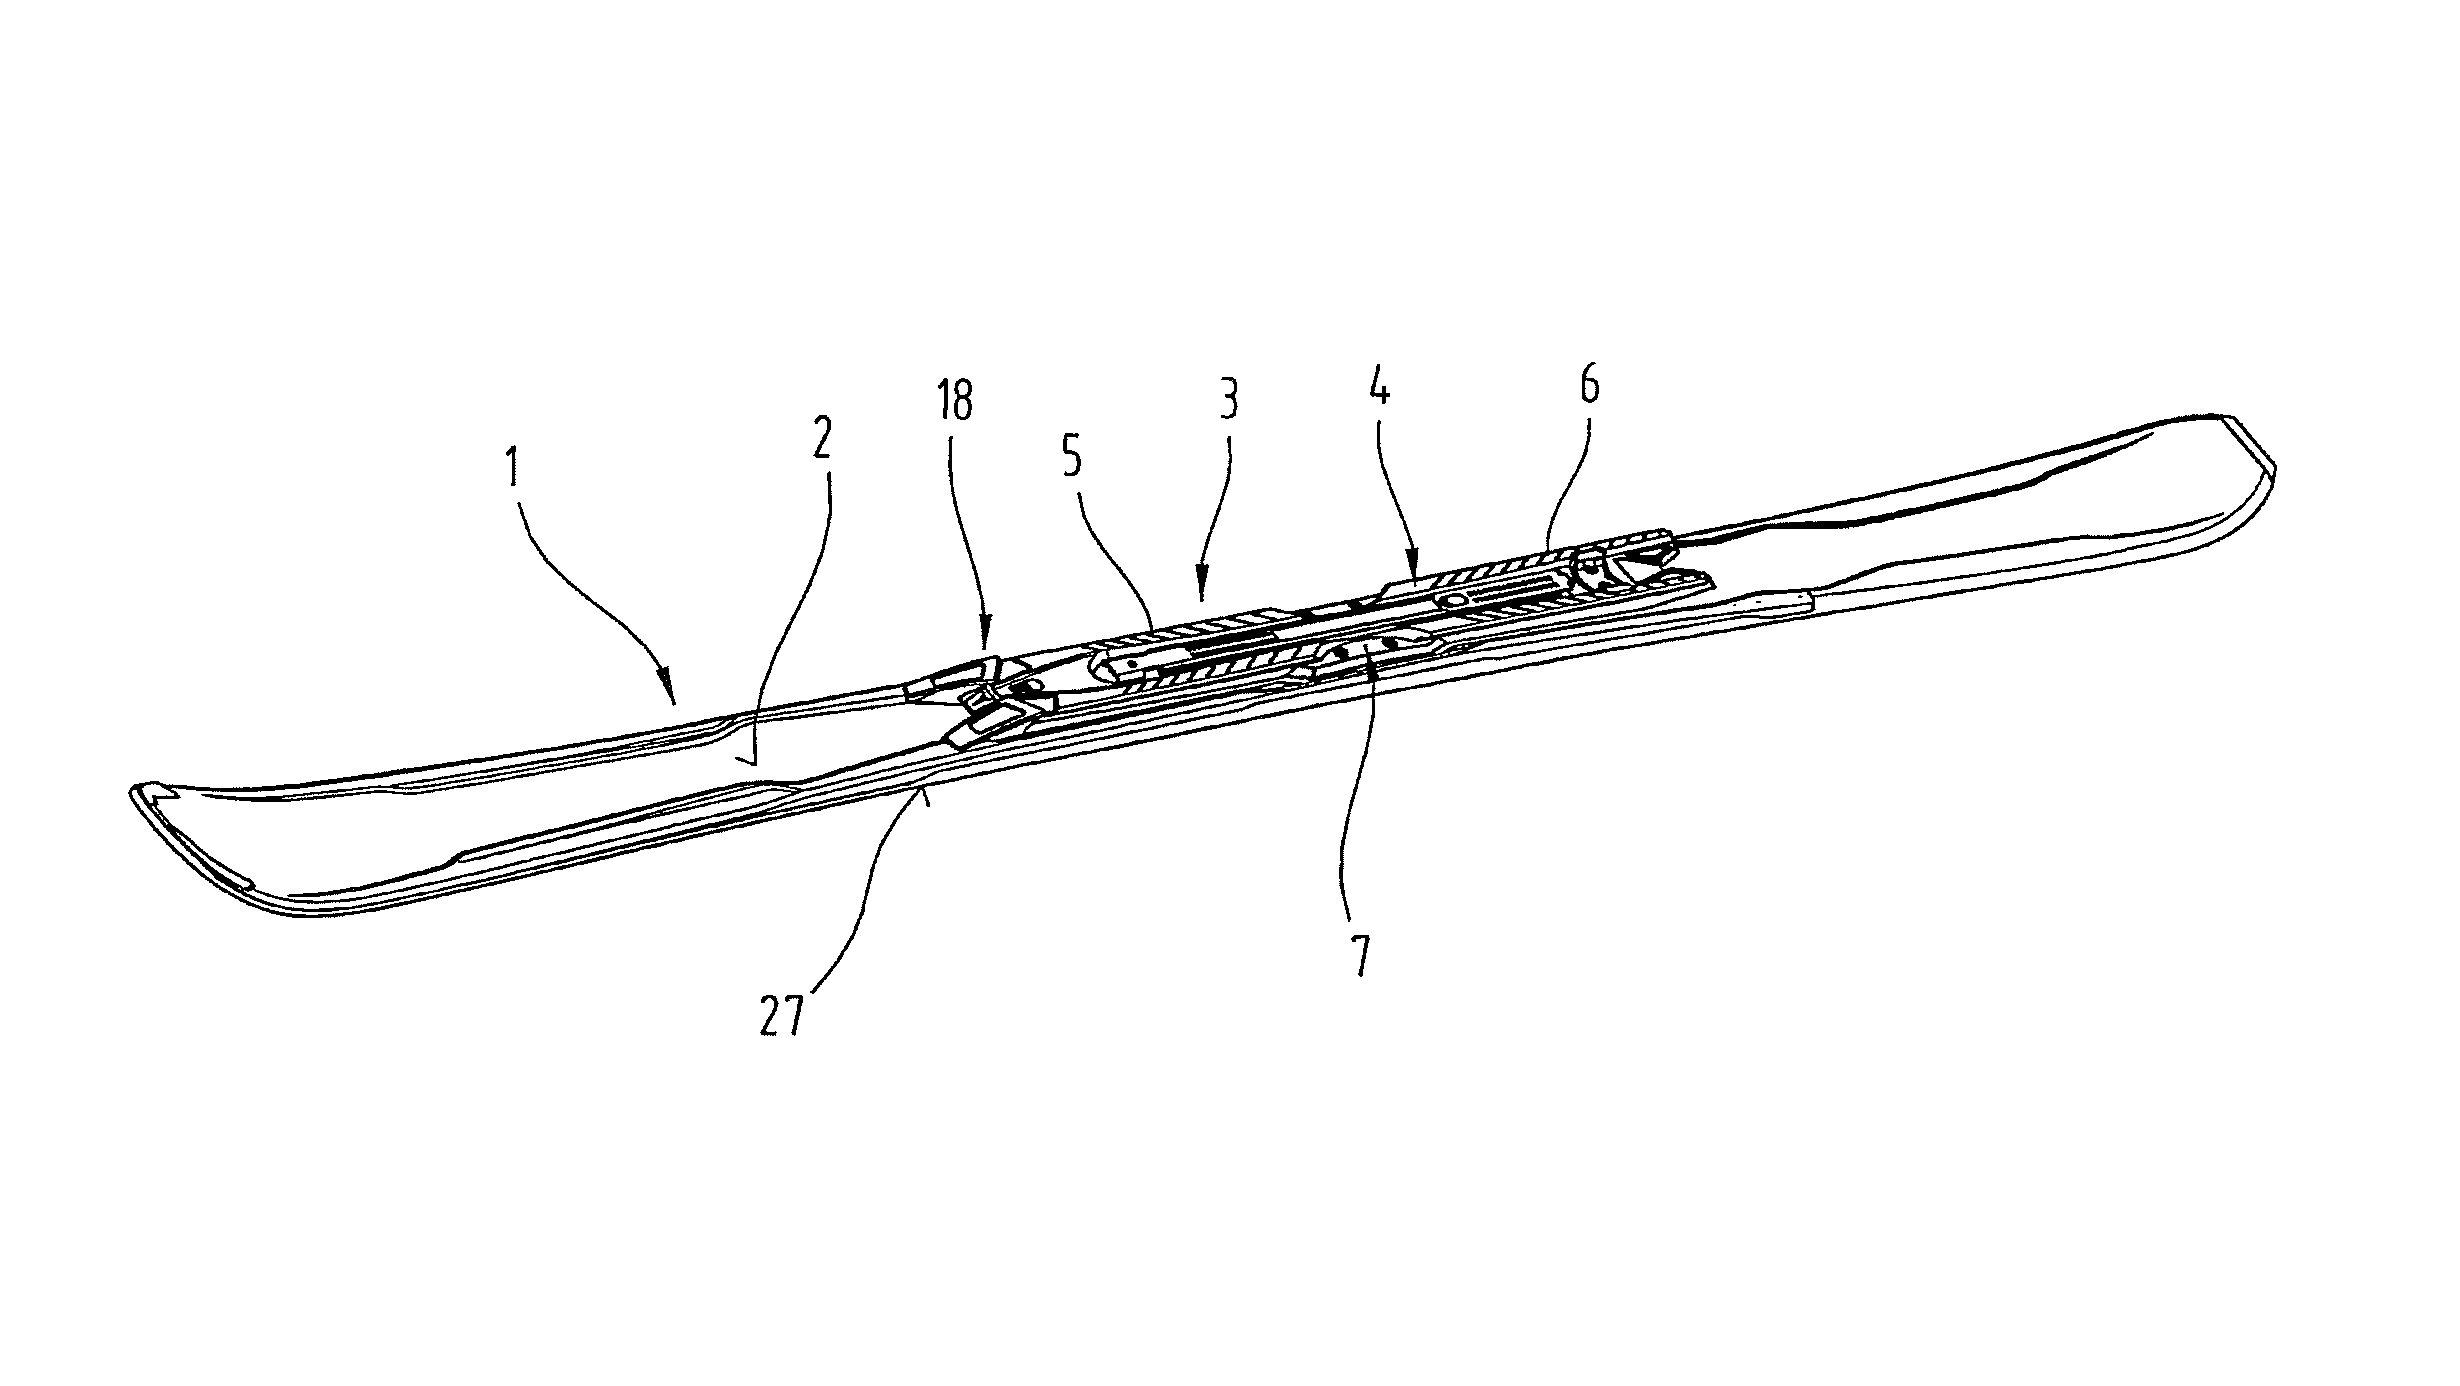 Ski with a connecting device for a ski binding